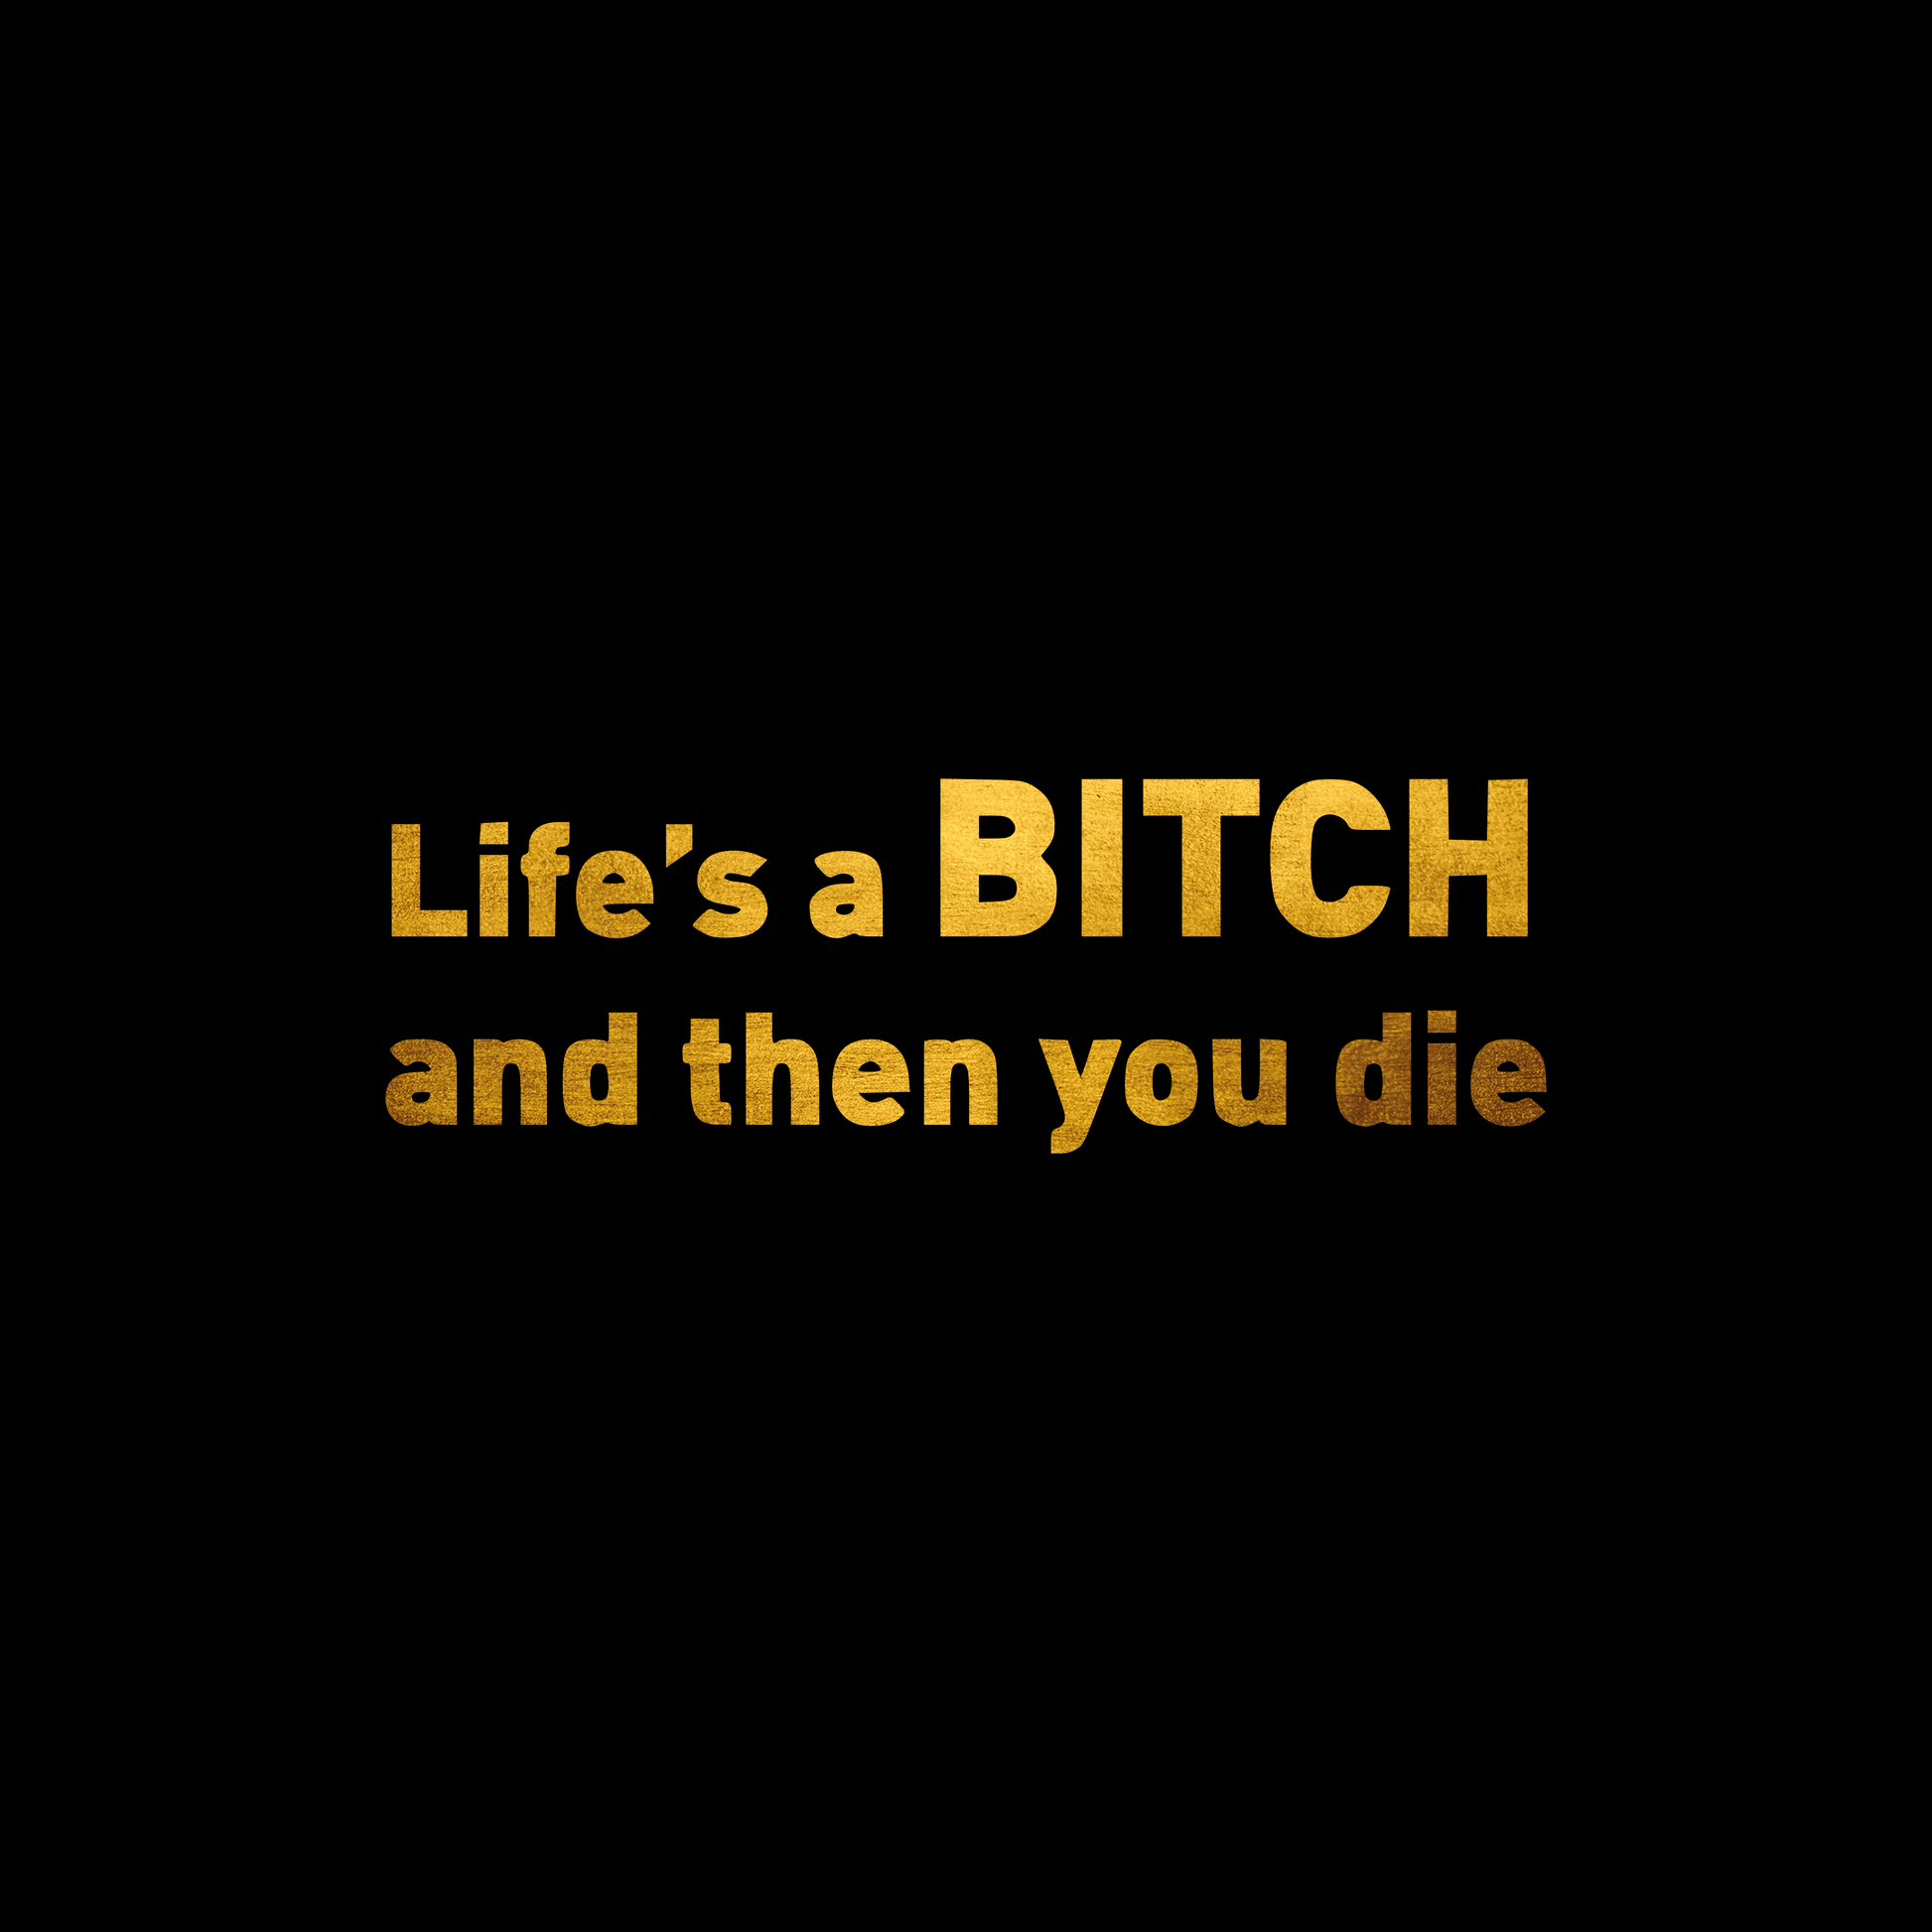 Life's a bitch and then you die sticker decal